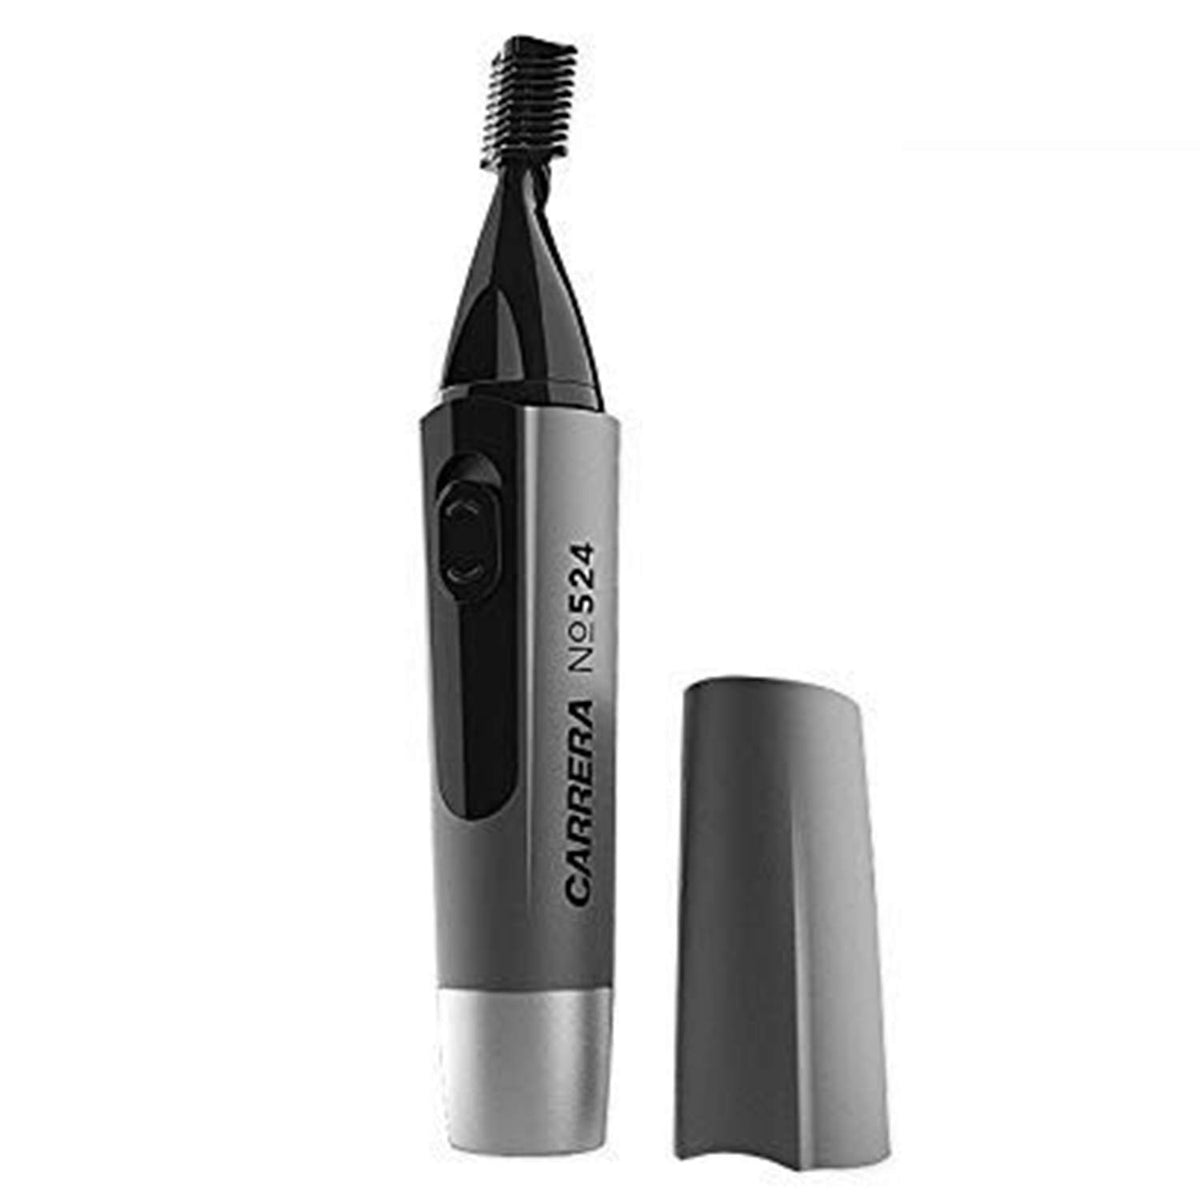 Carrera, Unisex, Hair Trimmer for Small Hair, Nose, Ear and Eye Brows,NO524